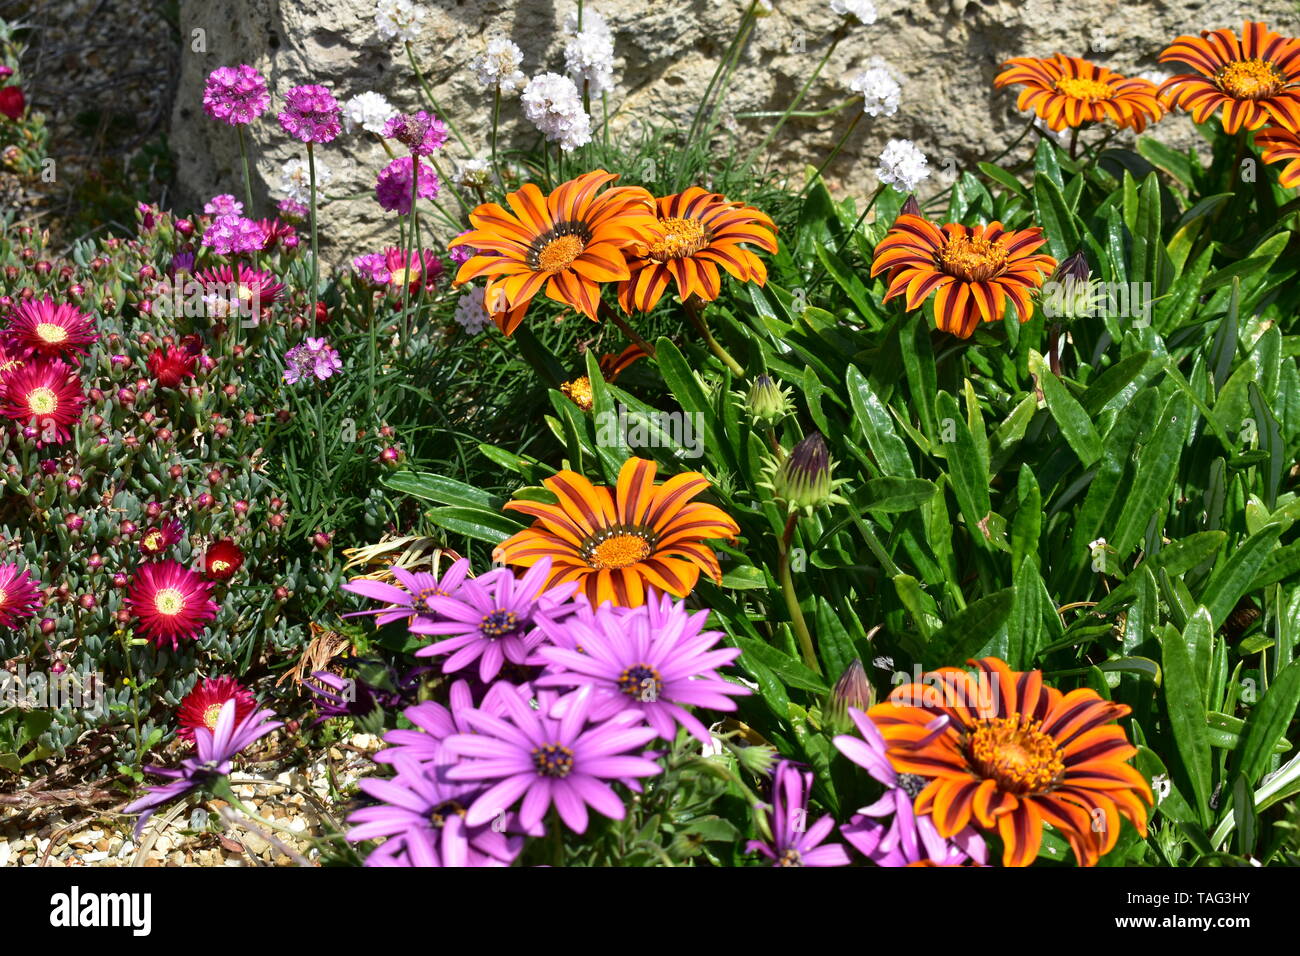 Flowers at Ventnor Esplanade, and Winter Gardens, Isle of Wight, UK. Stock Photo